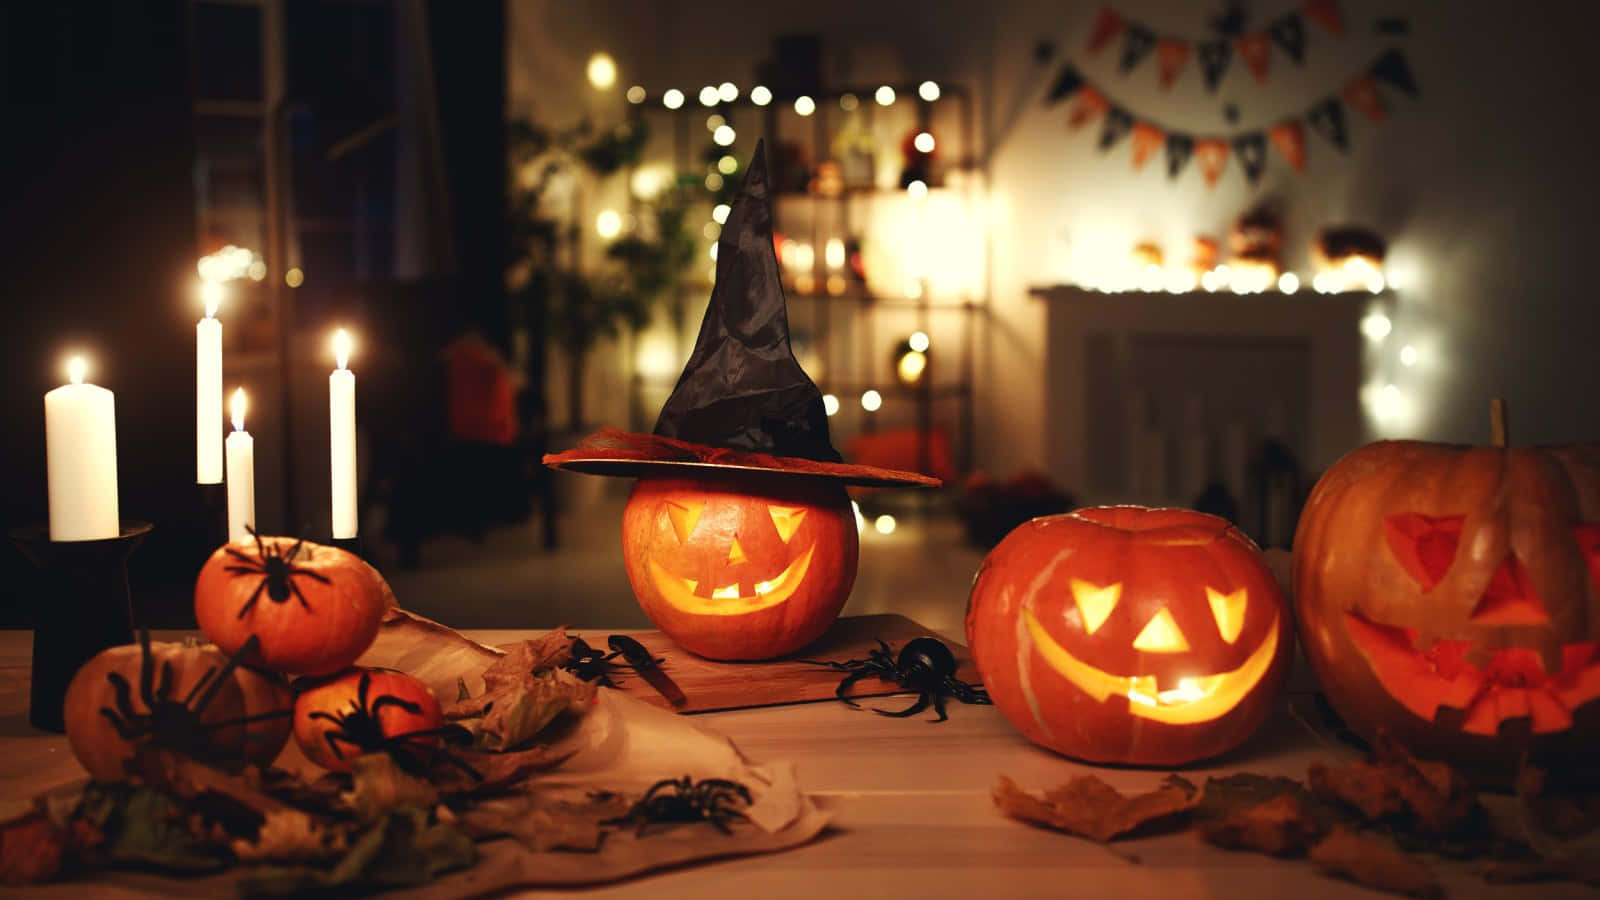 "Celebrate Halloween with spooky and festive candles" Wallpaper